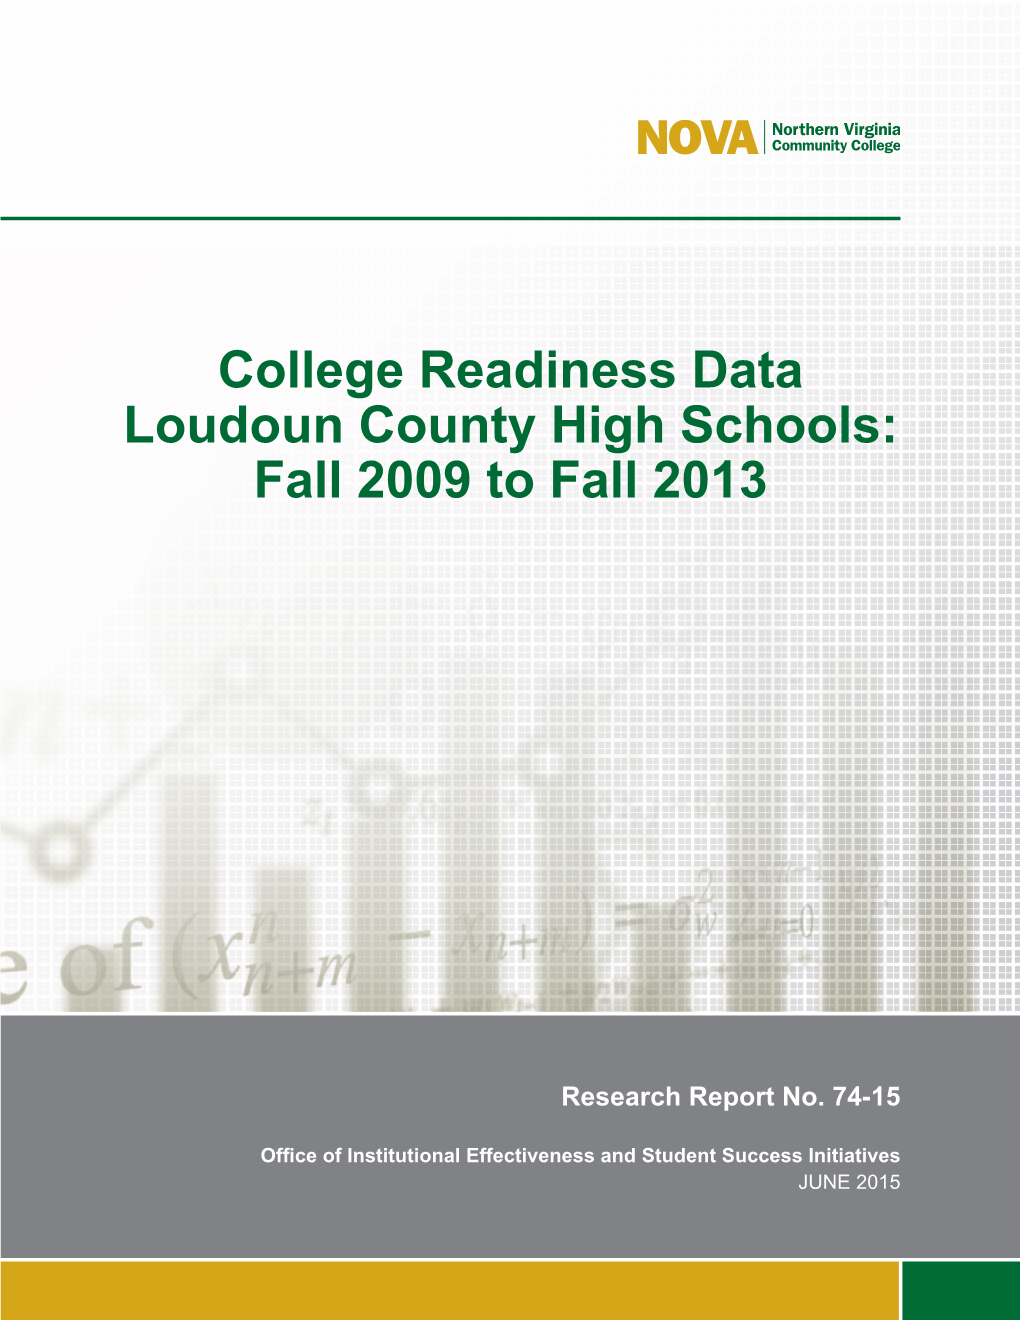 College Readiness Data Loudoun County High Schools: Fall 2009 to Fall 2013